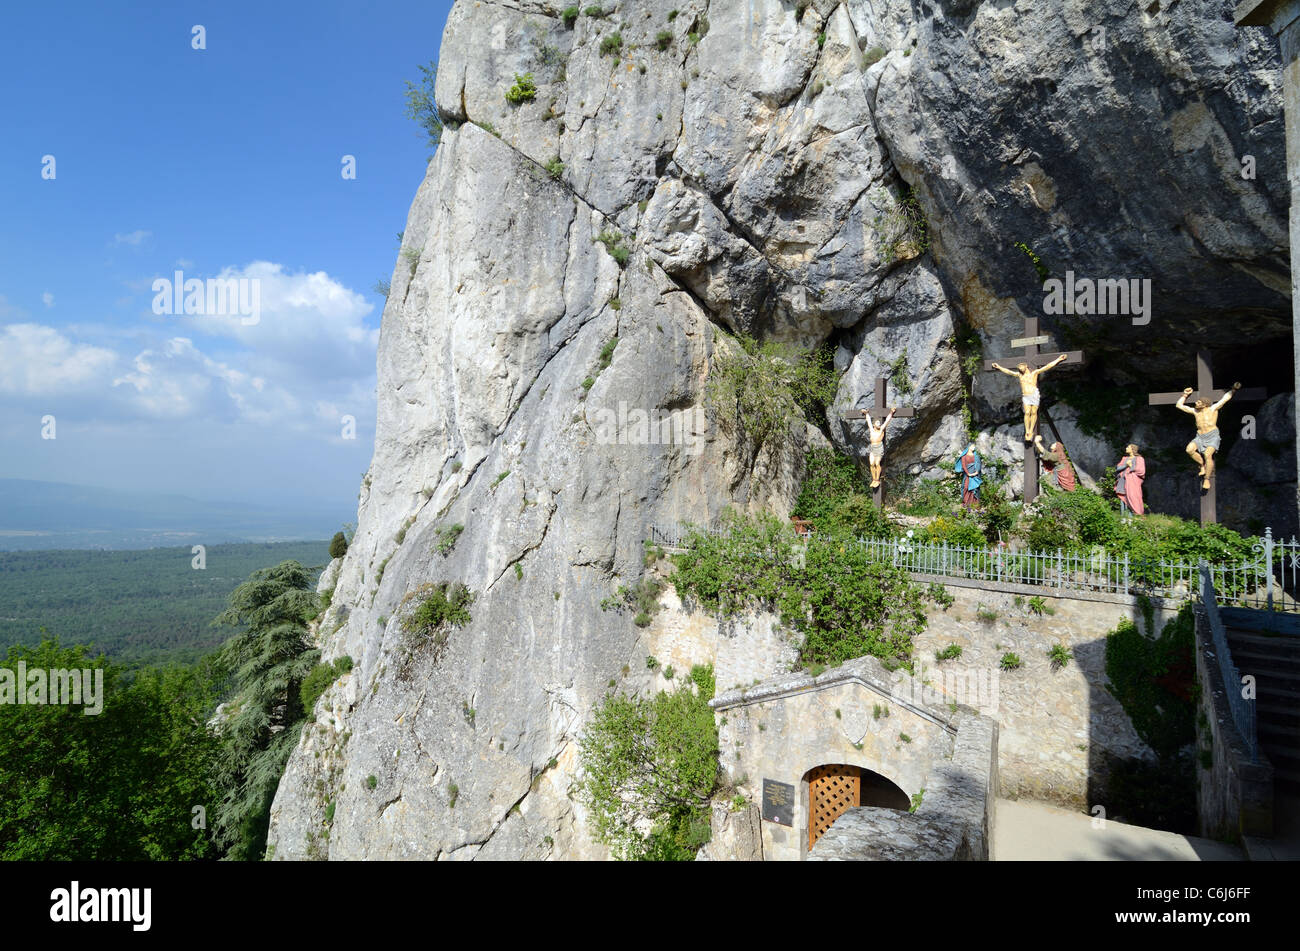 Crucifixion at Mary Magdalene Holy Cave or Grotto in the Massif of Sainte-Baume or Sainte Baume Mountain Provence France Stock Photo